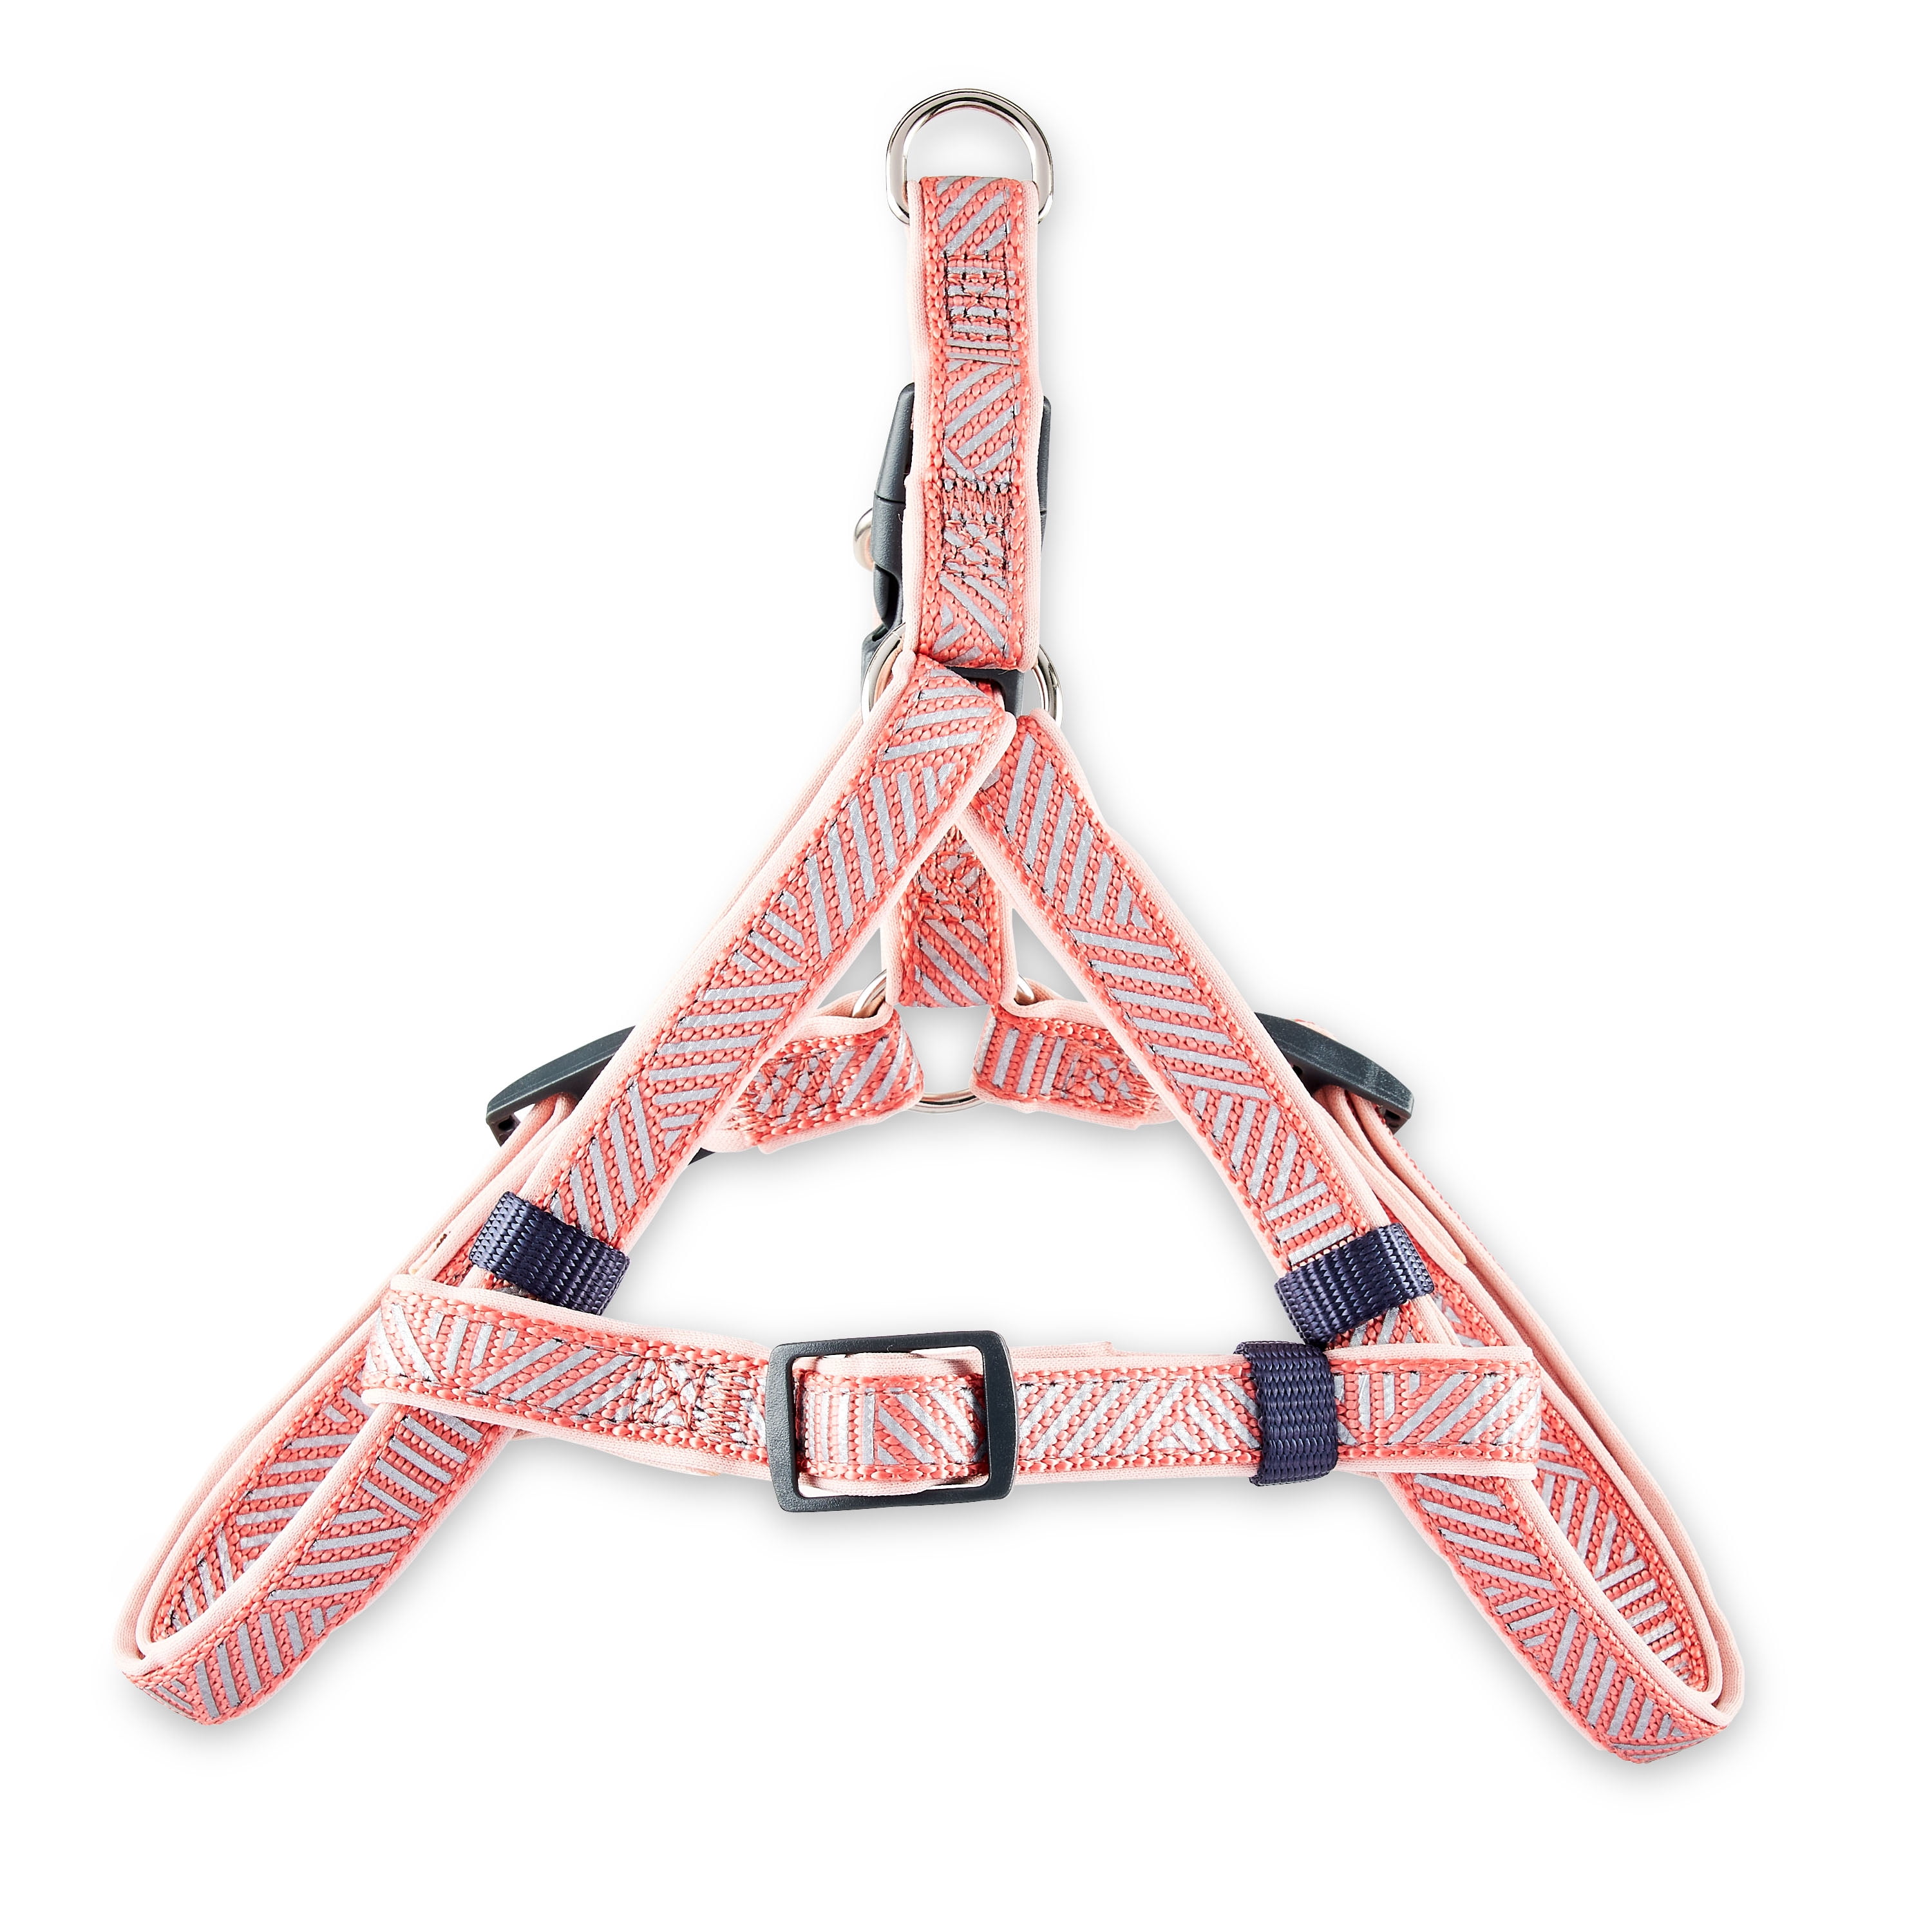 Vibrant Life Reflective Step-in Dog Harness, Salmon Pink, Medium (16"-18" Chest Size)